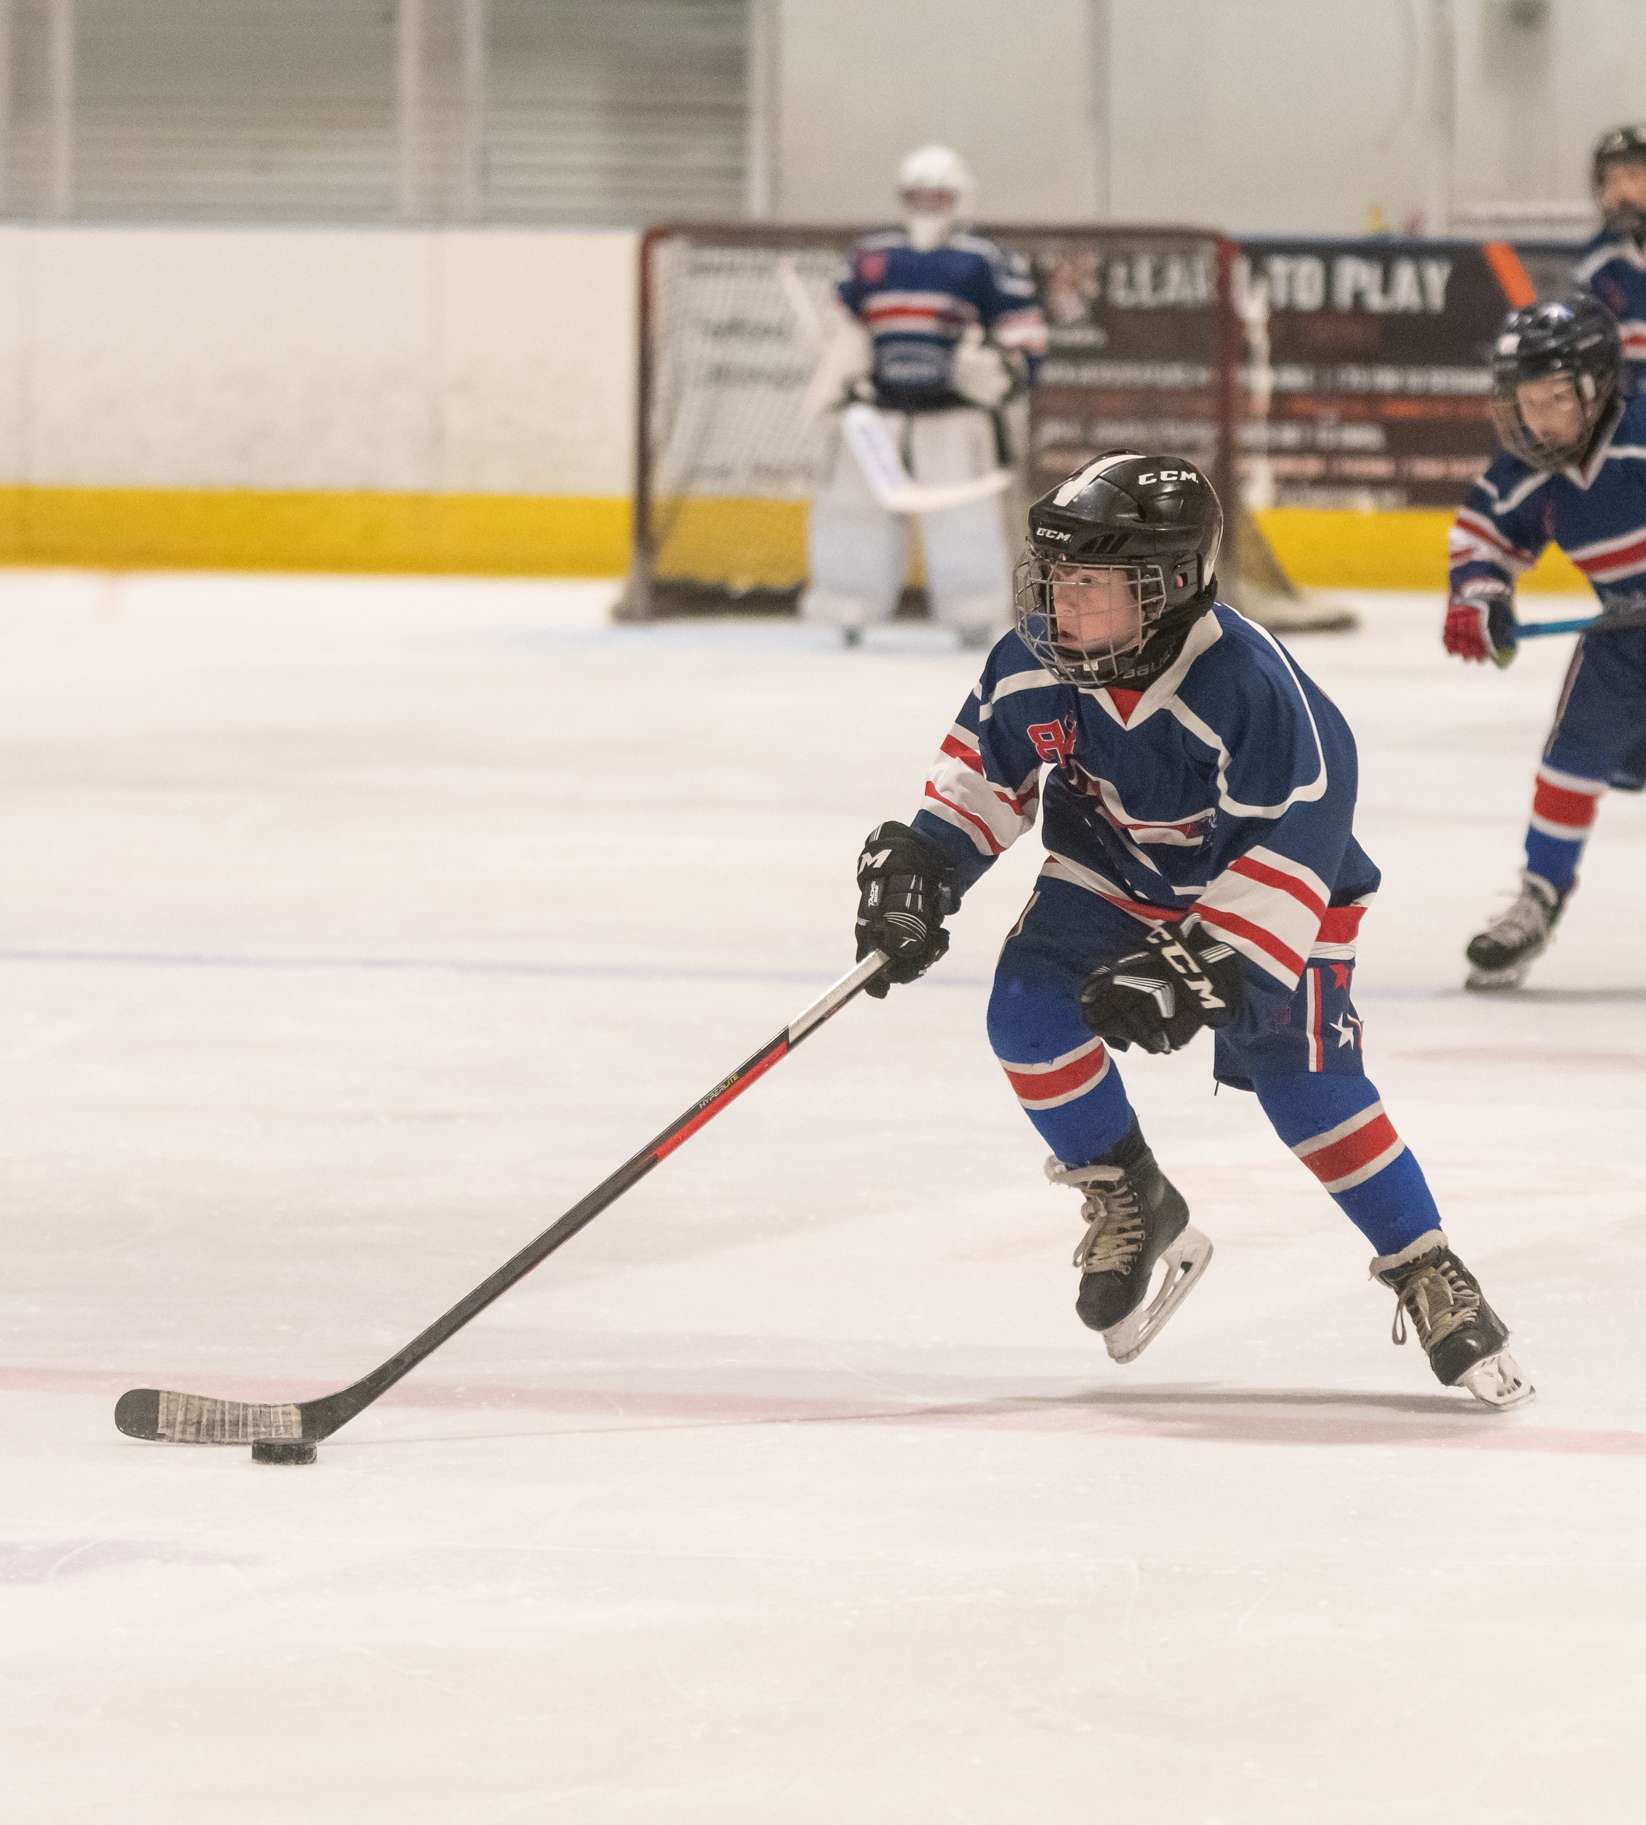 young ice hockey player during play